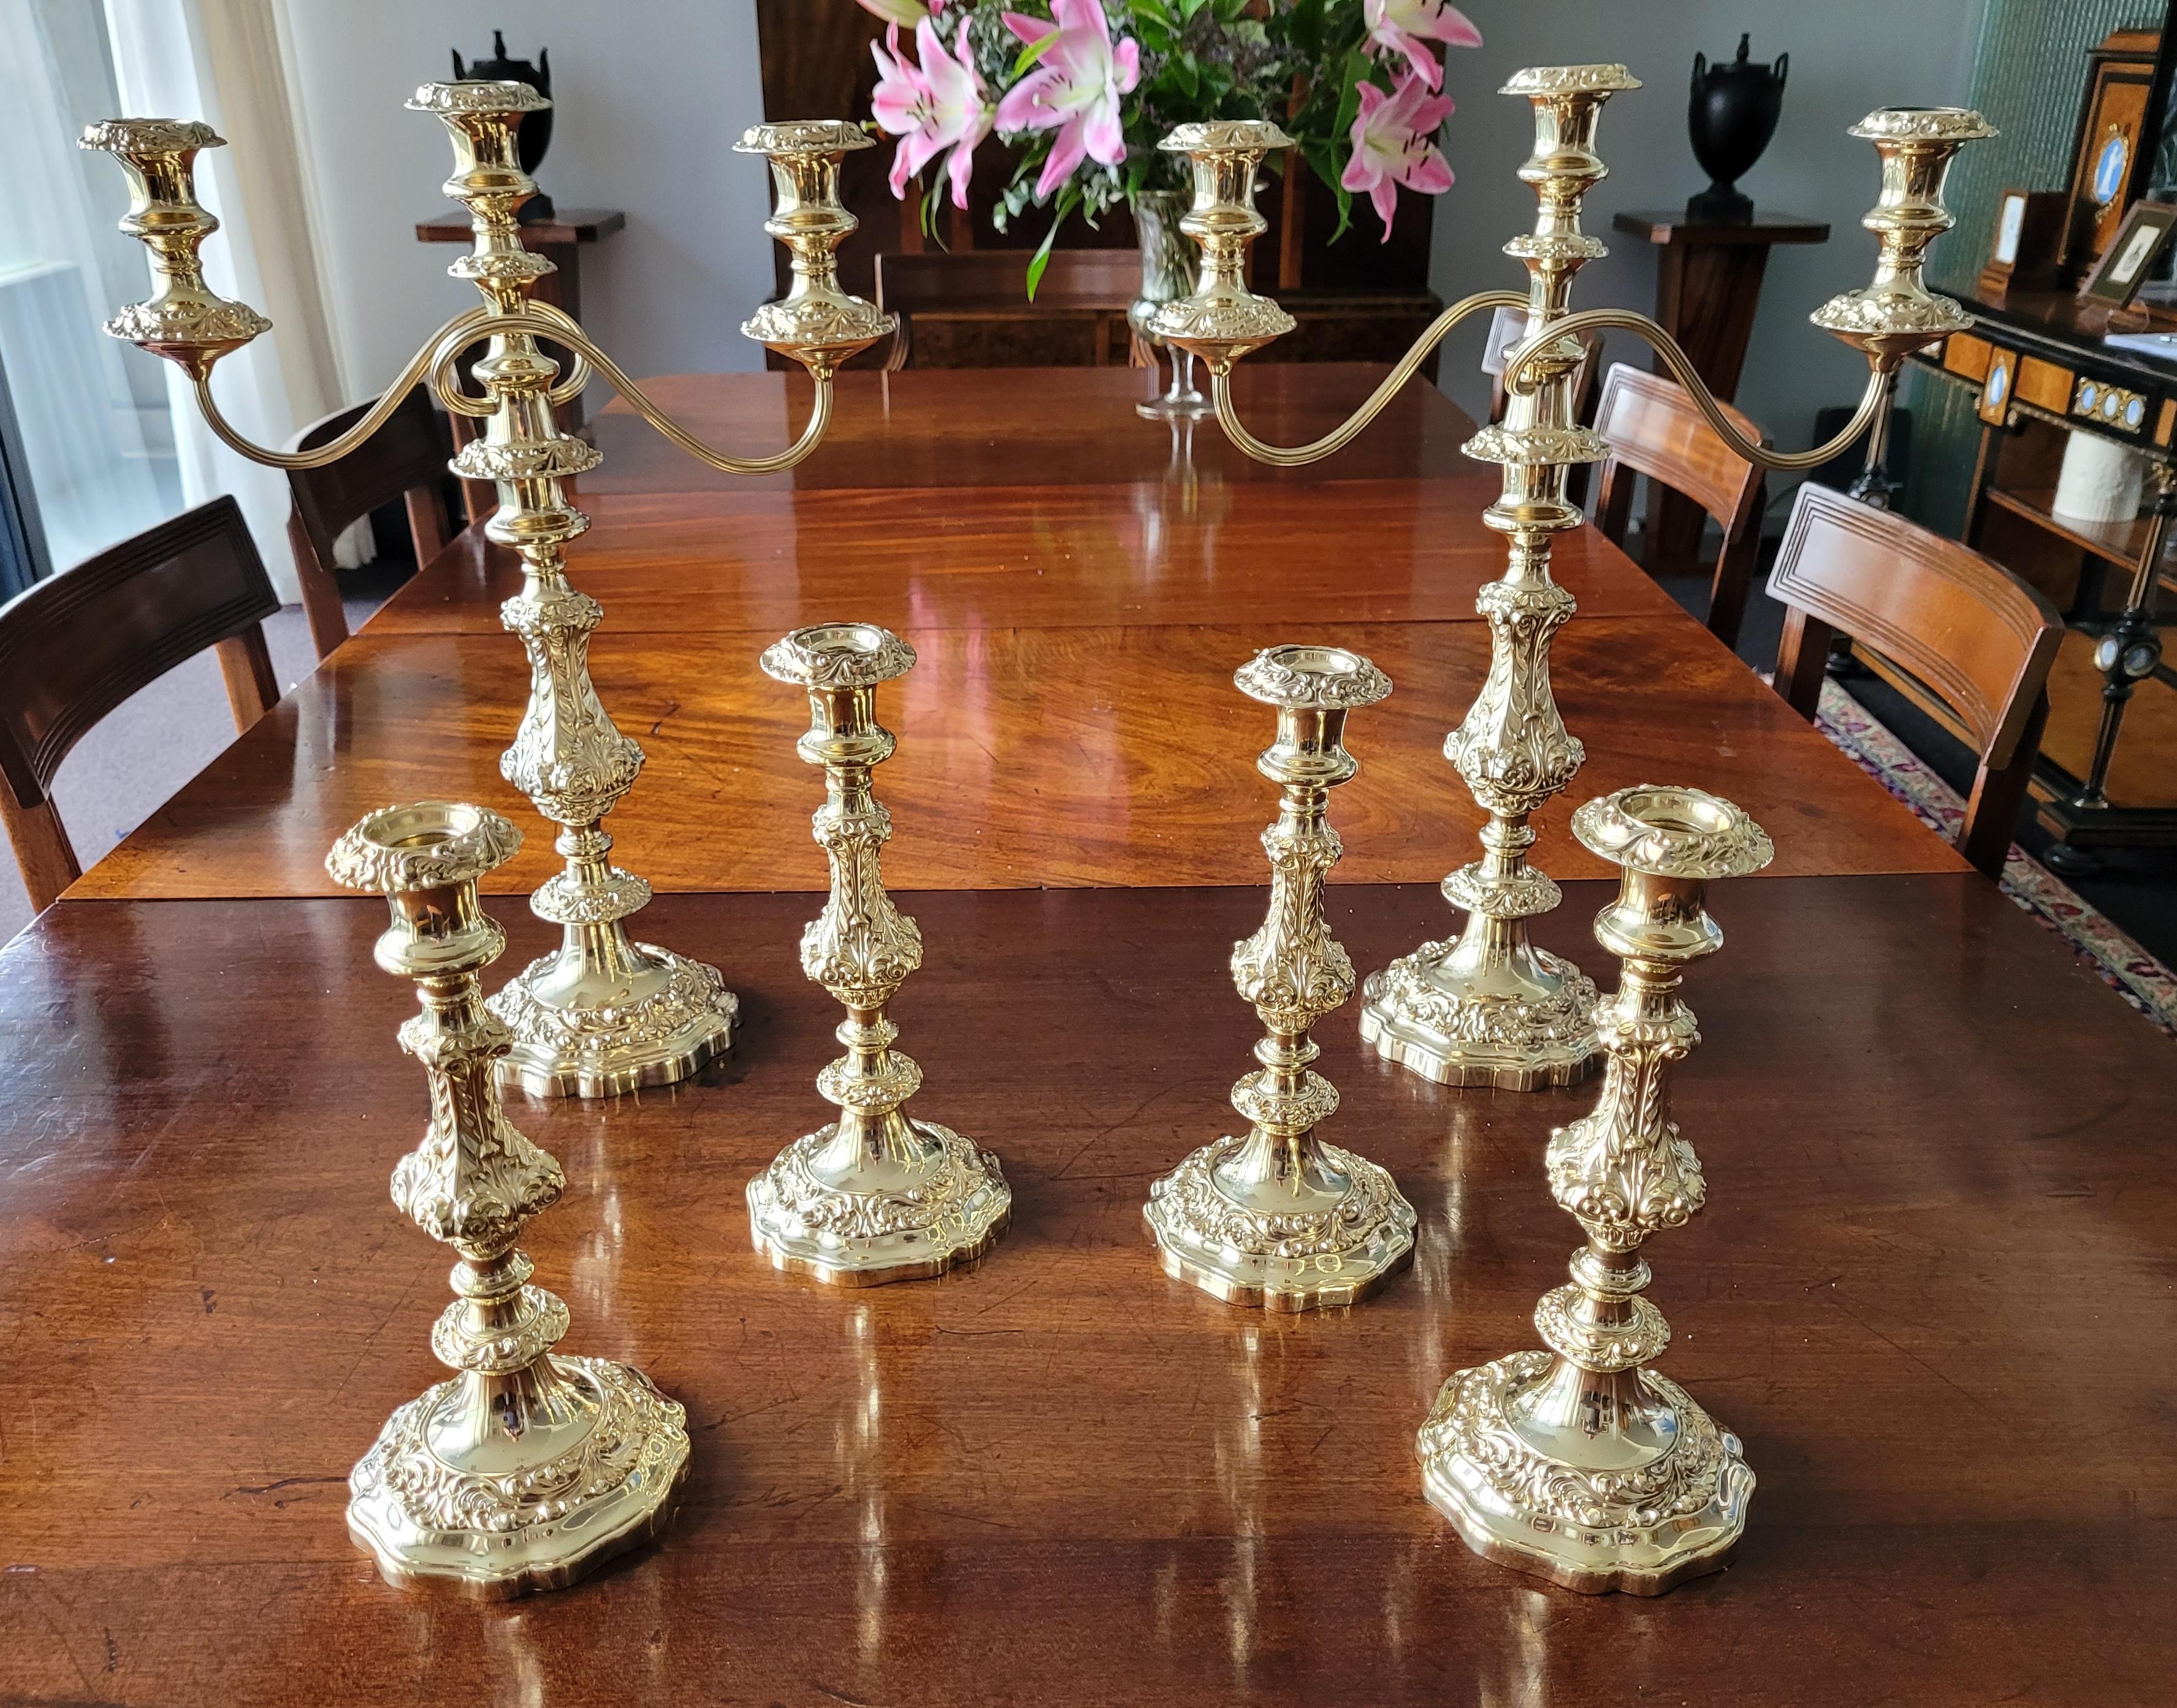 Set of Candelabra and Candelholders, Silver and Gold Plated by Gorham For Sale 3